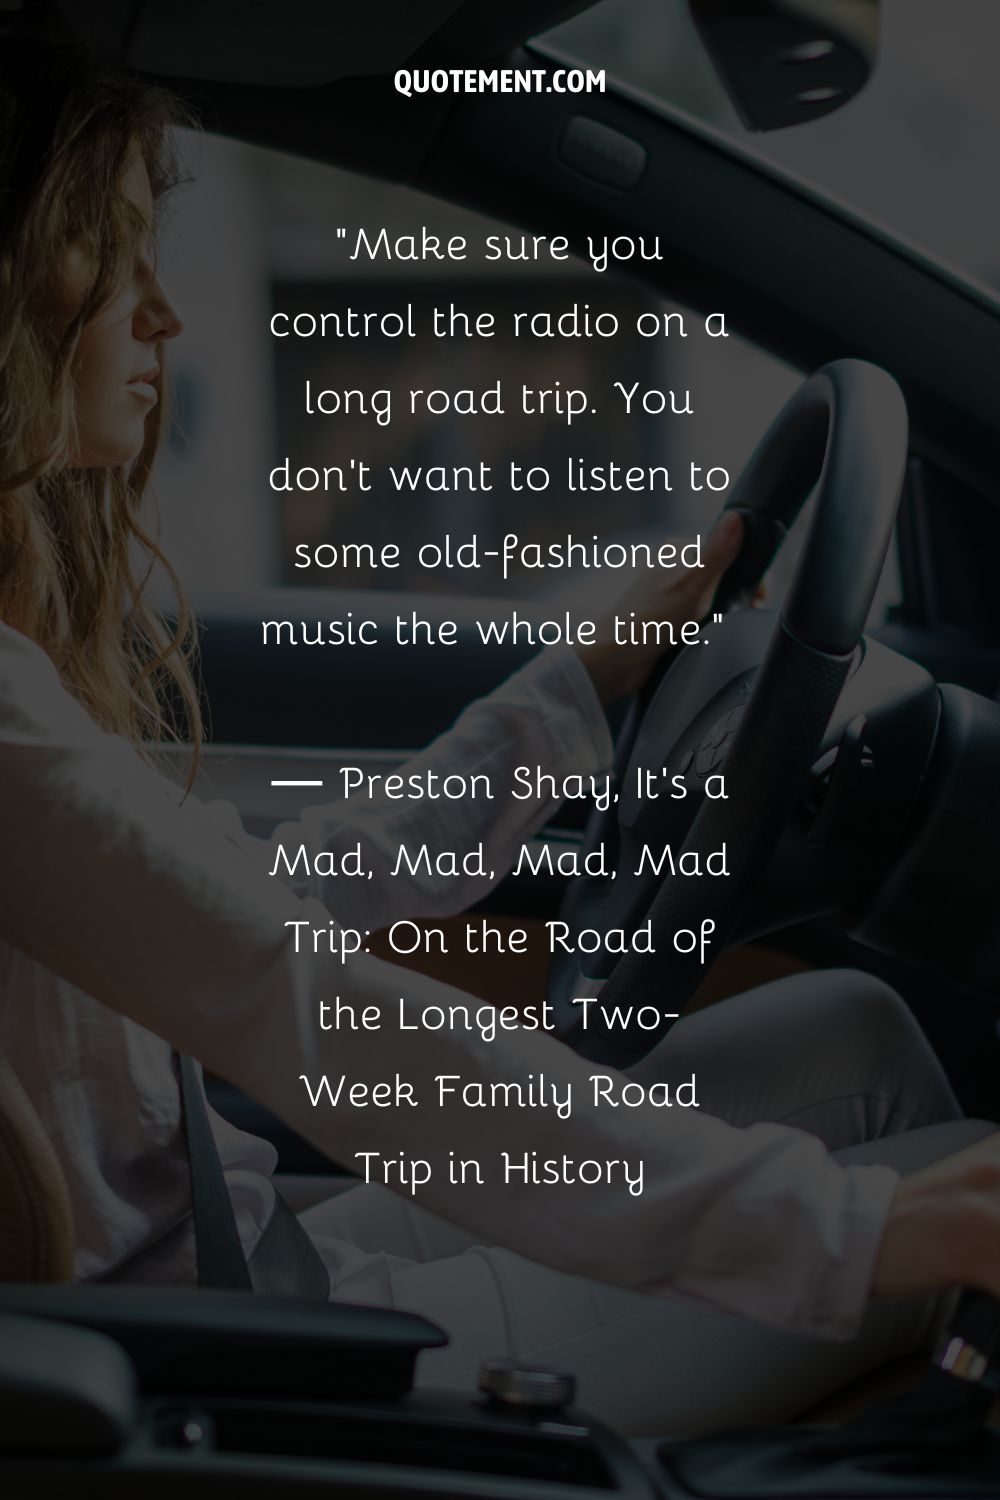 Make sure you control the radio on a long road trip. You don't want to listen to some old-fashioned music the whole time